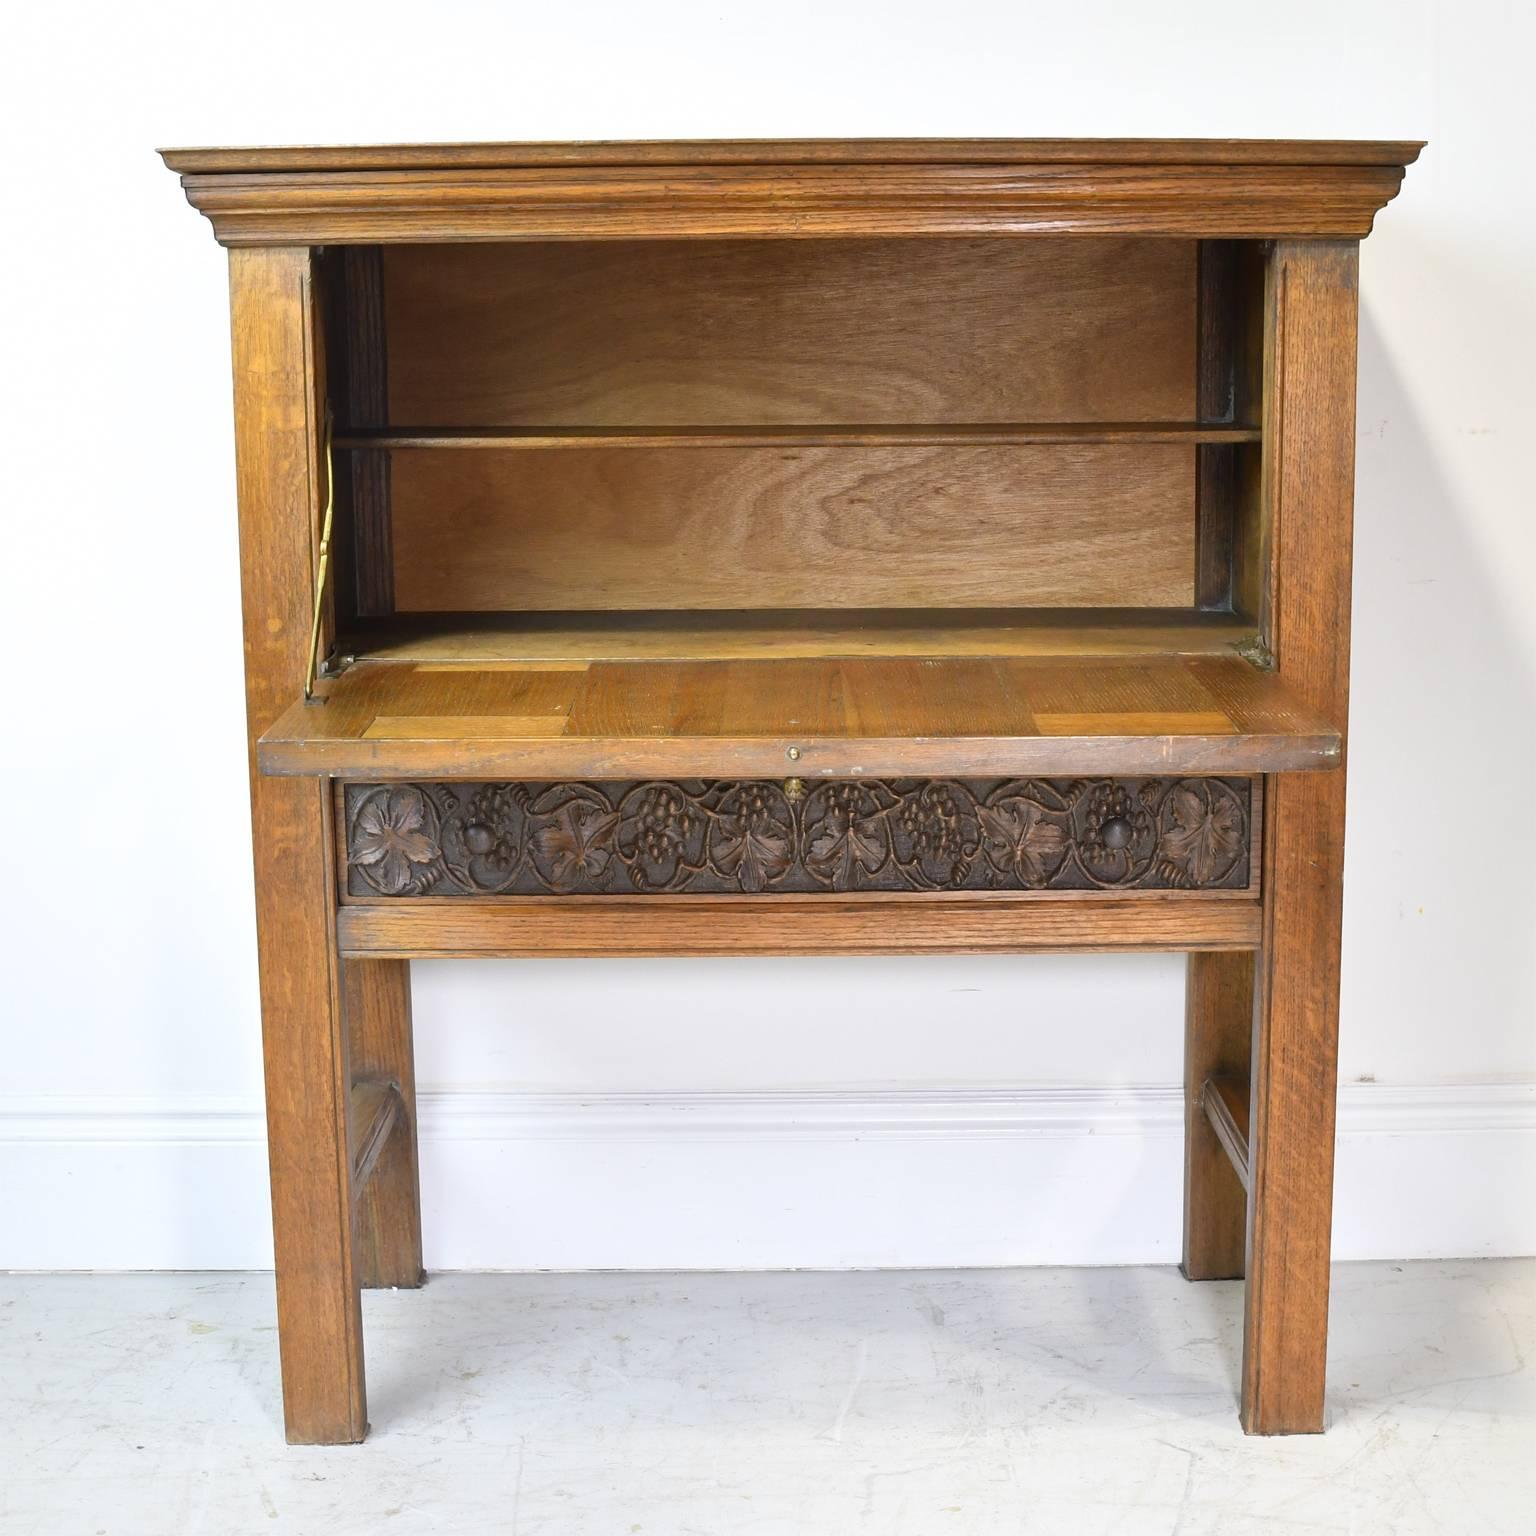 A handsome and rather singular Arts & Crafts bar cabinet in oak with fall-front and resting on square legs. Embellishments include carved linen-fold on the sides and front door panels that flank a centre panel of carved grapes and foliage that is